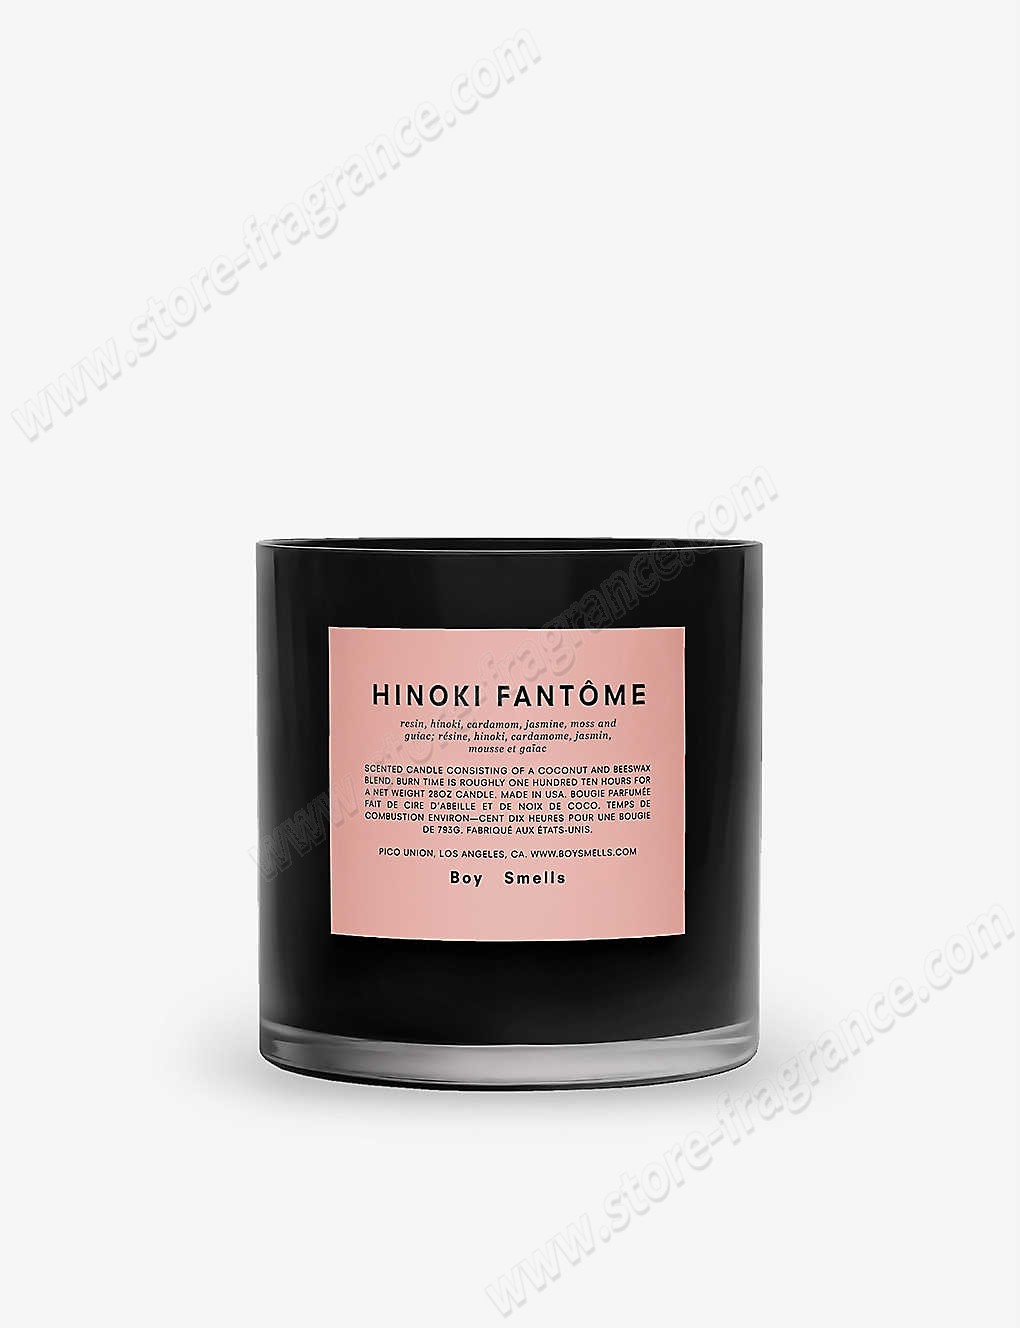 BOY SMELLS/Hinoki Fantôme scented candle 793g ✿ Discount Store - BOY SMELLS/Hinoki Fantôme scented candle 793g ✿ Discount Store